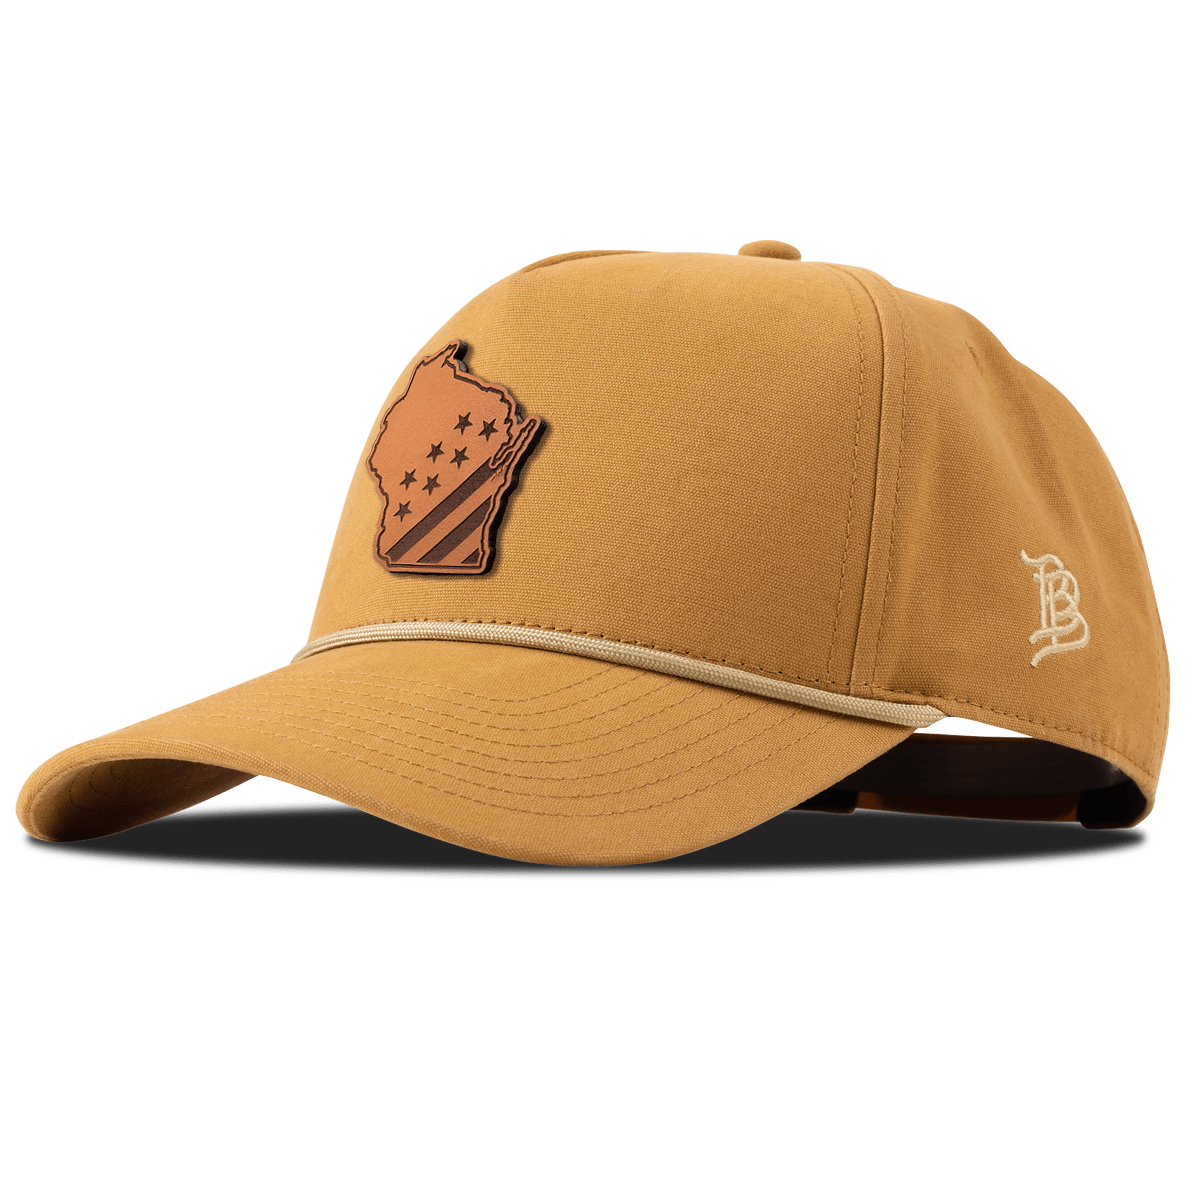 Wisconsin 30 Canvas 5 Panel Rope Wheat